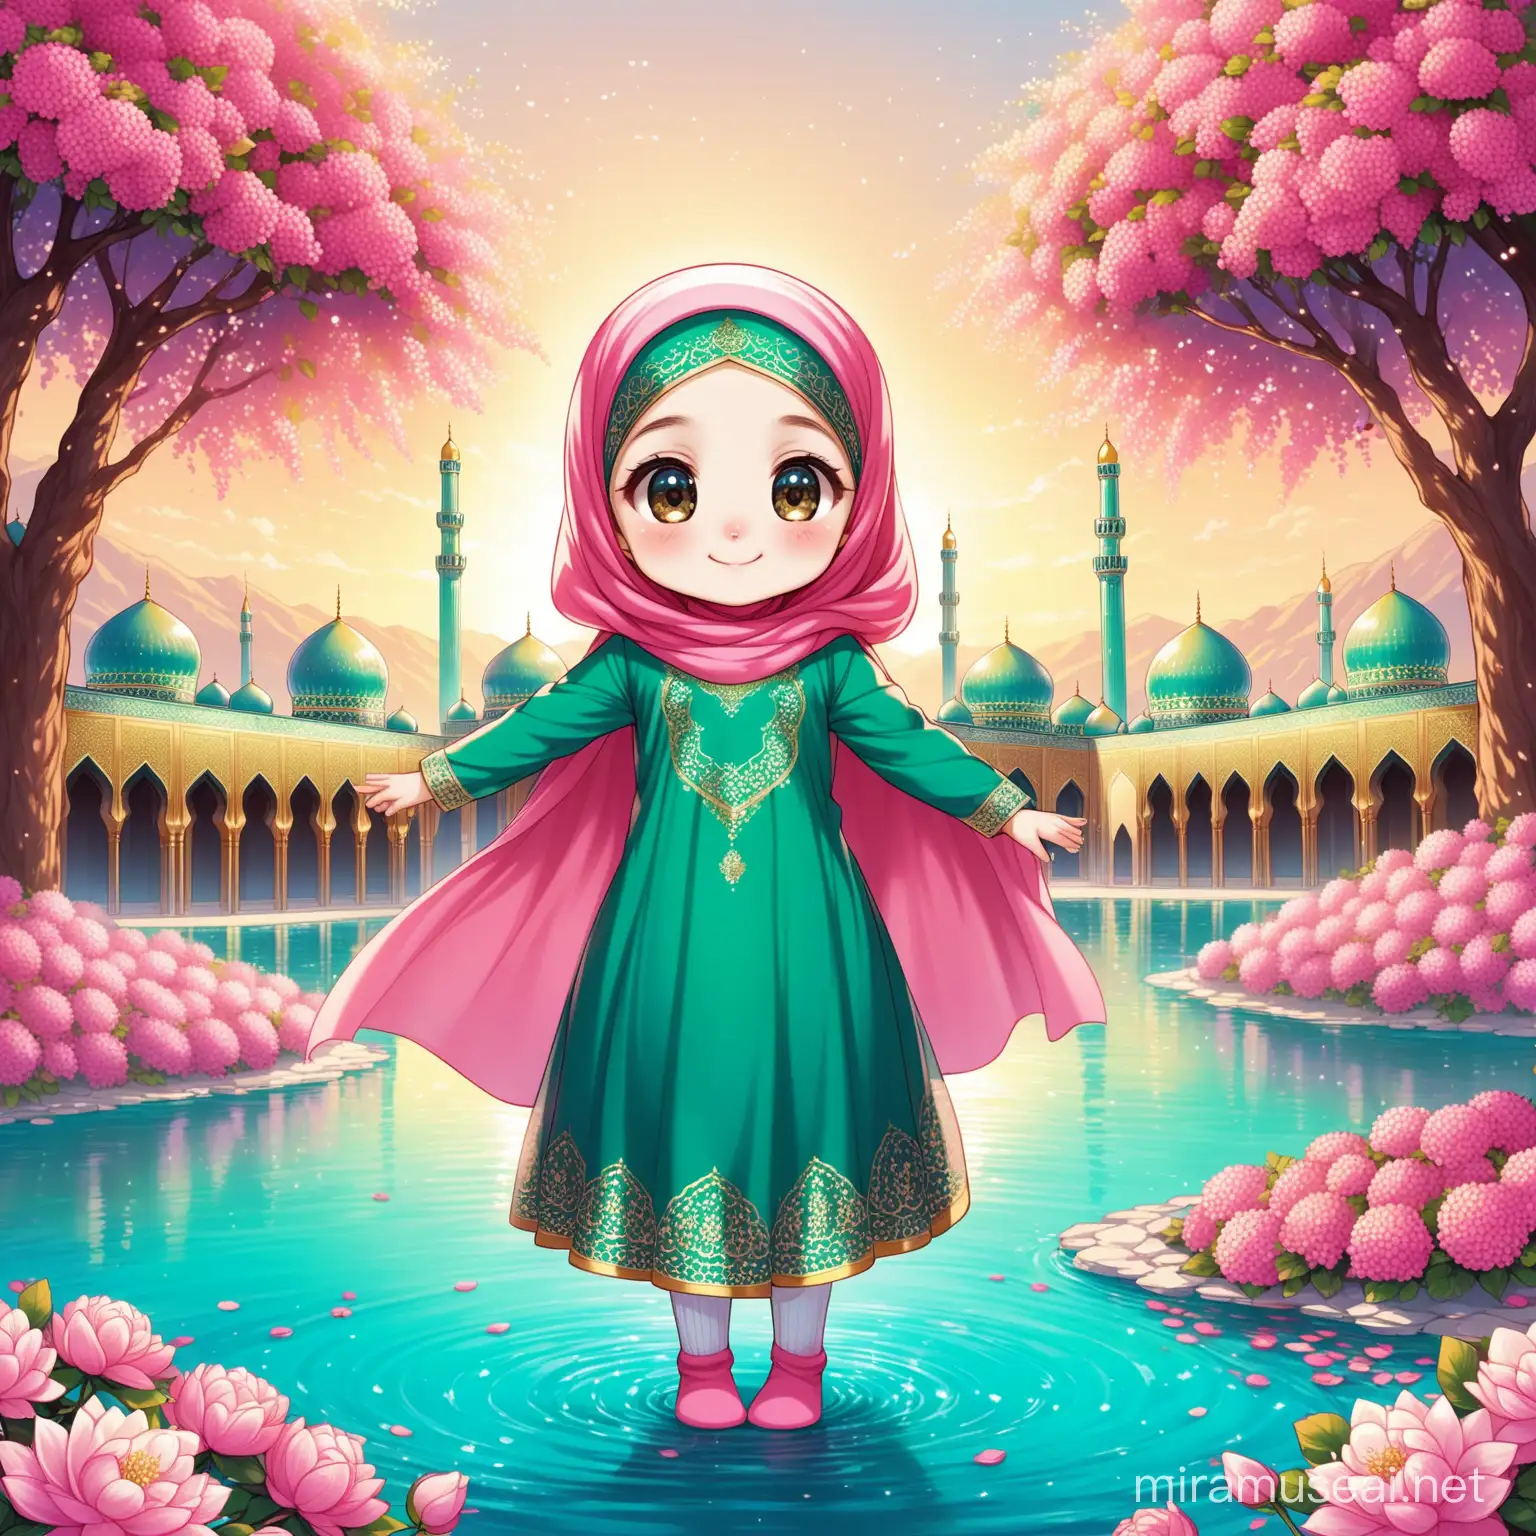 Character Persian little girl(full height, Muslim, with emphasis no hair out of veil(Hijab), smaller eyes, bigger nose, white skin, cute, smiling, wearing socks, clothes full of Persian designs).

Atmosphere shrine of Imam Reza, nice flag of Iran proudly raised and full of many pink flowers, lake, sparing.